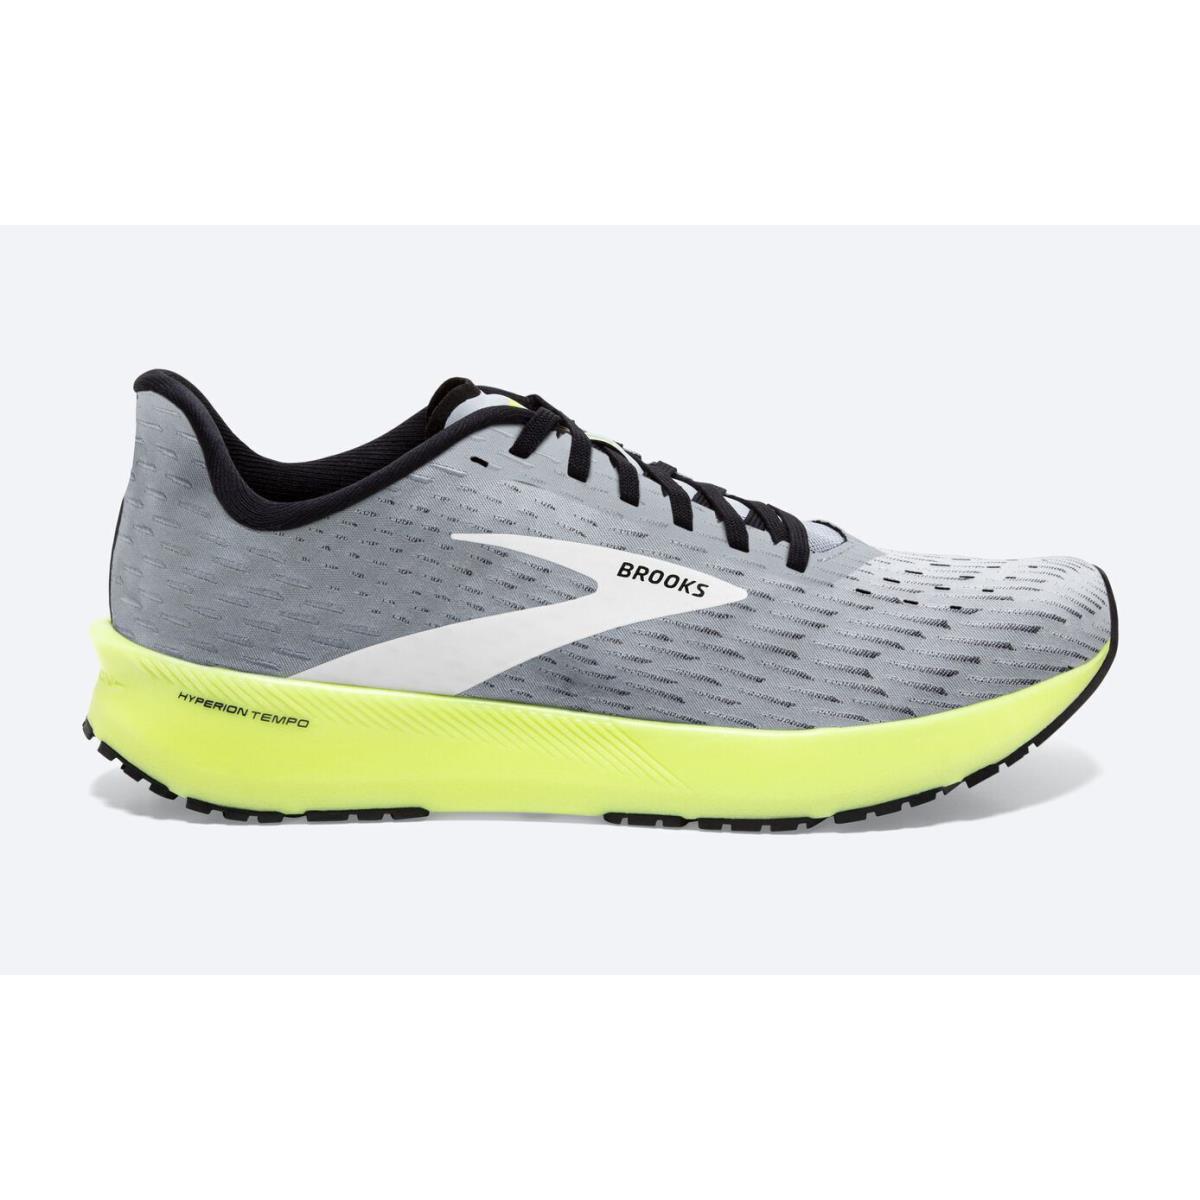 Brooks shoes HYPERION TEMPO - Grey/Black/Nightlife 1